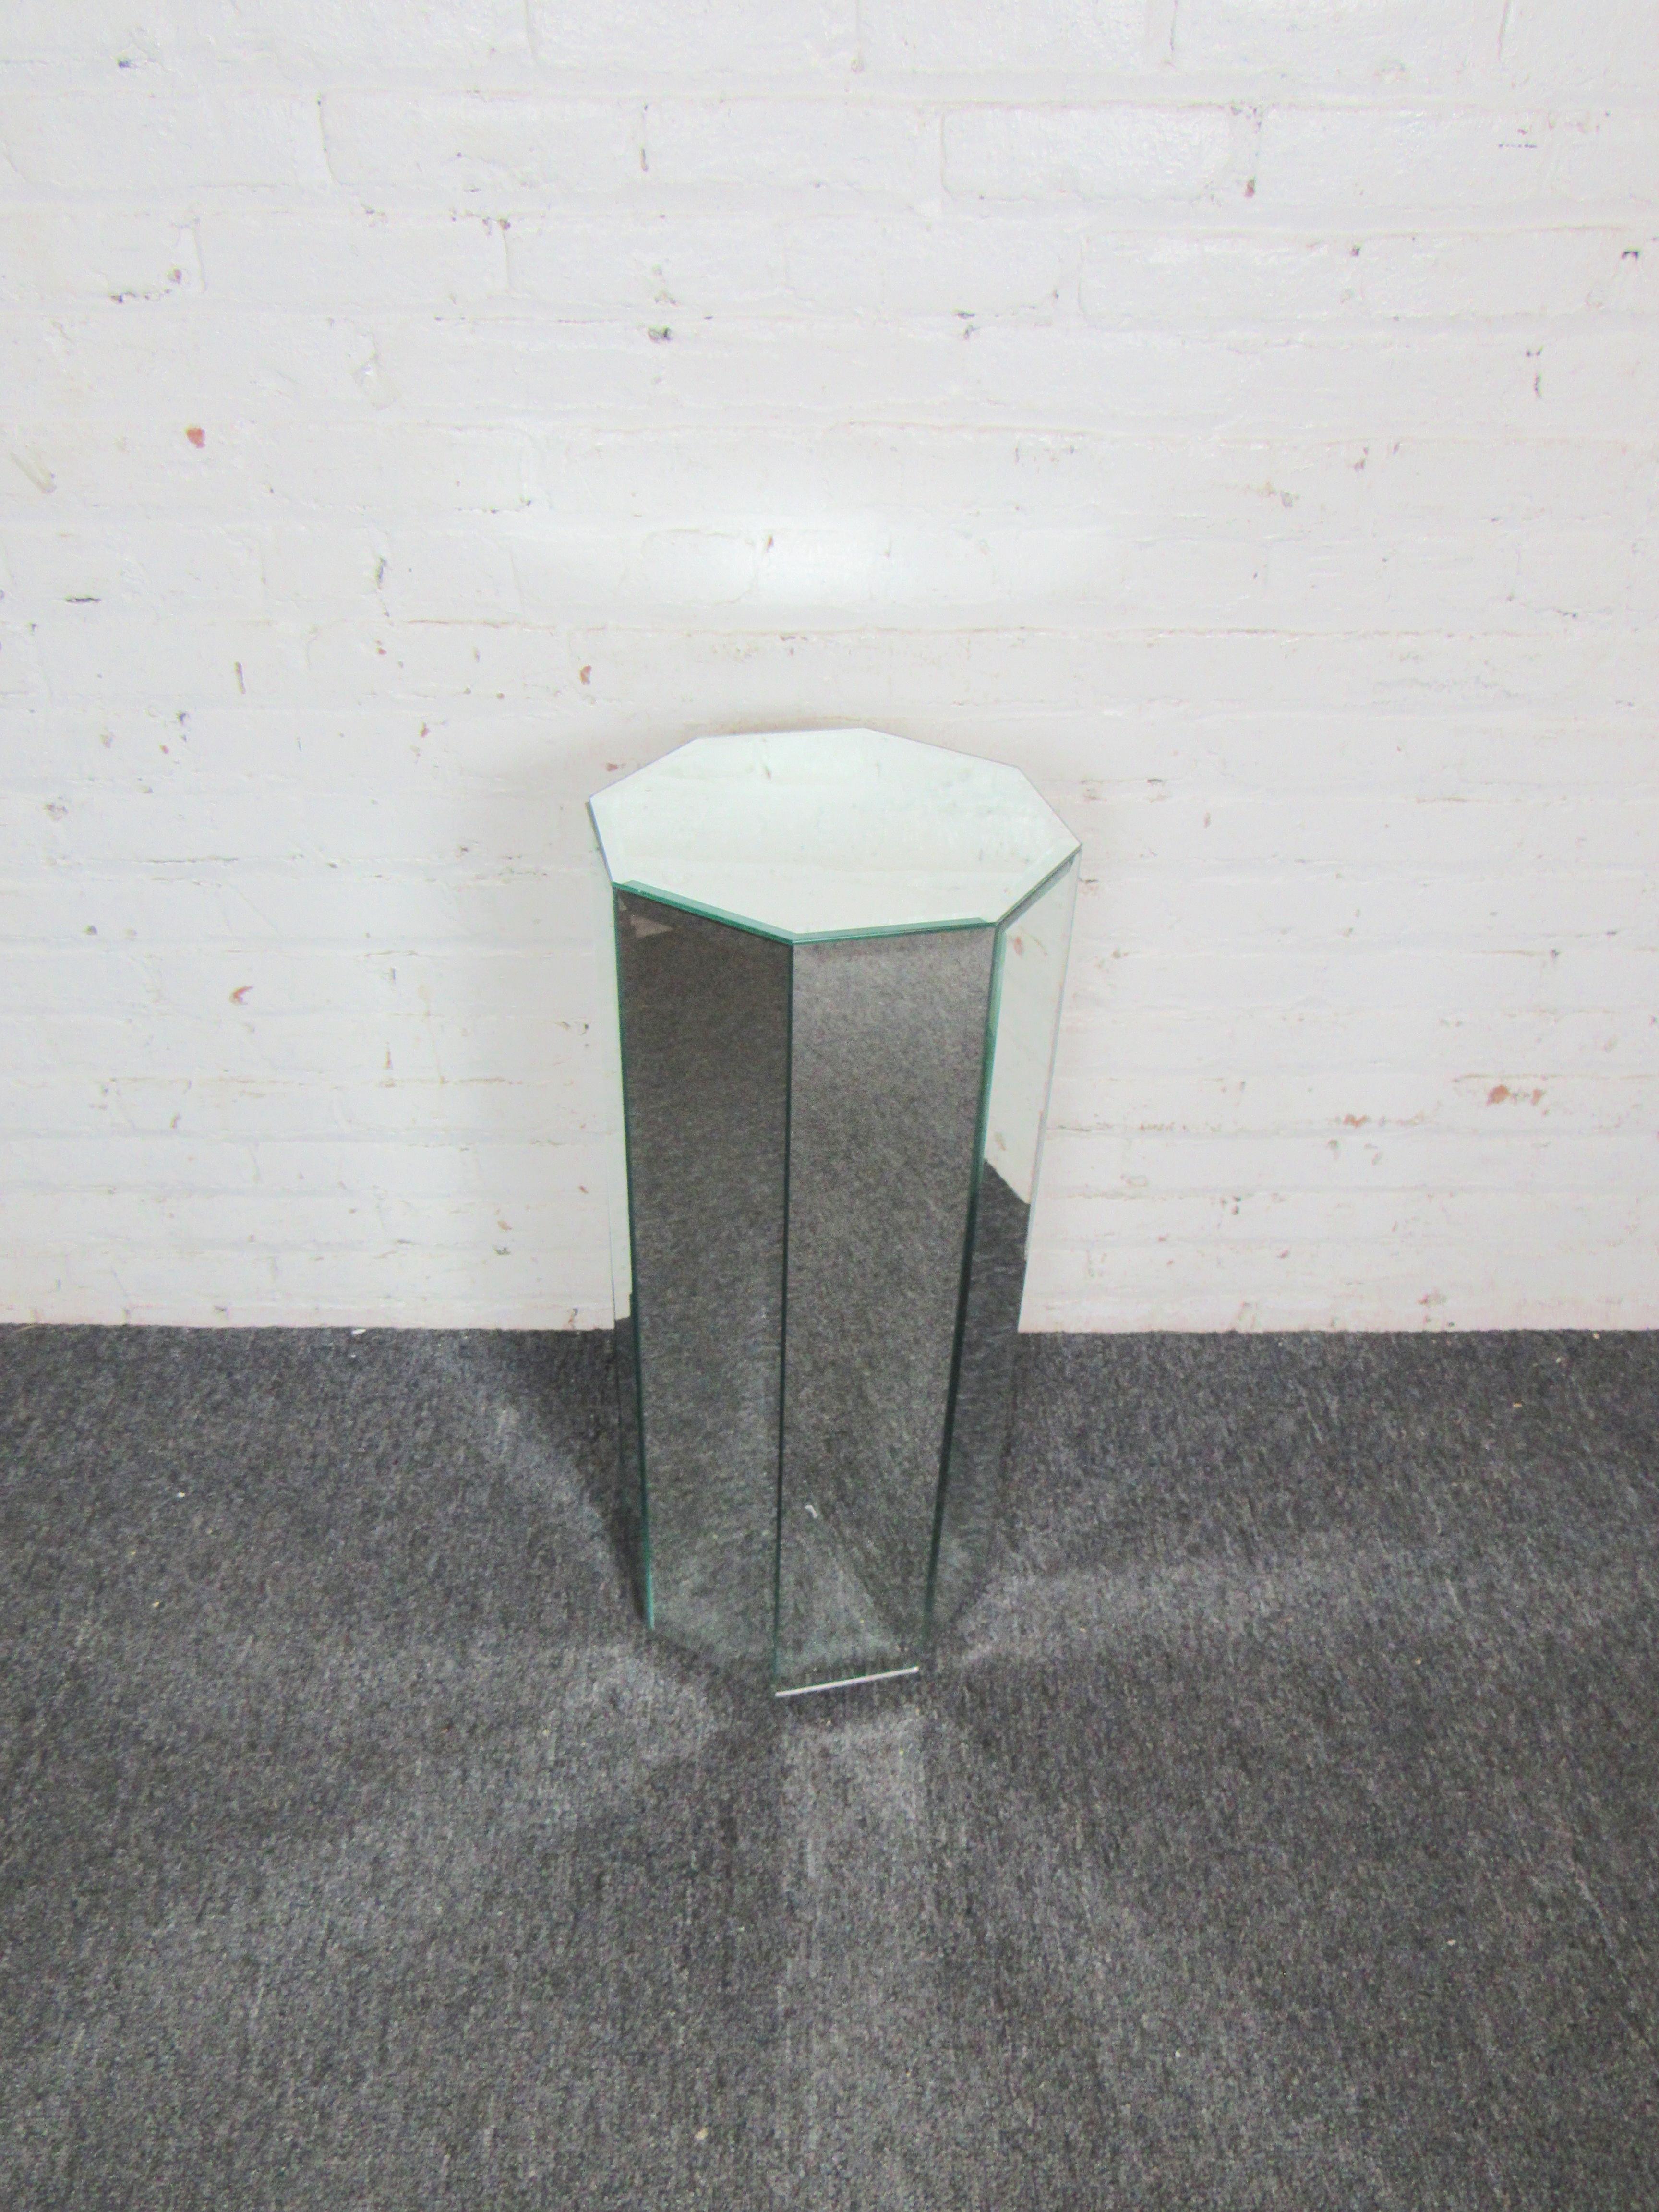 An interesting eight-sided pedestal covered in mirror panels, this vintage piece adds elegant Mid-Century style to any space. Please confirm item location with seller (NY/NJ).